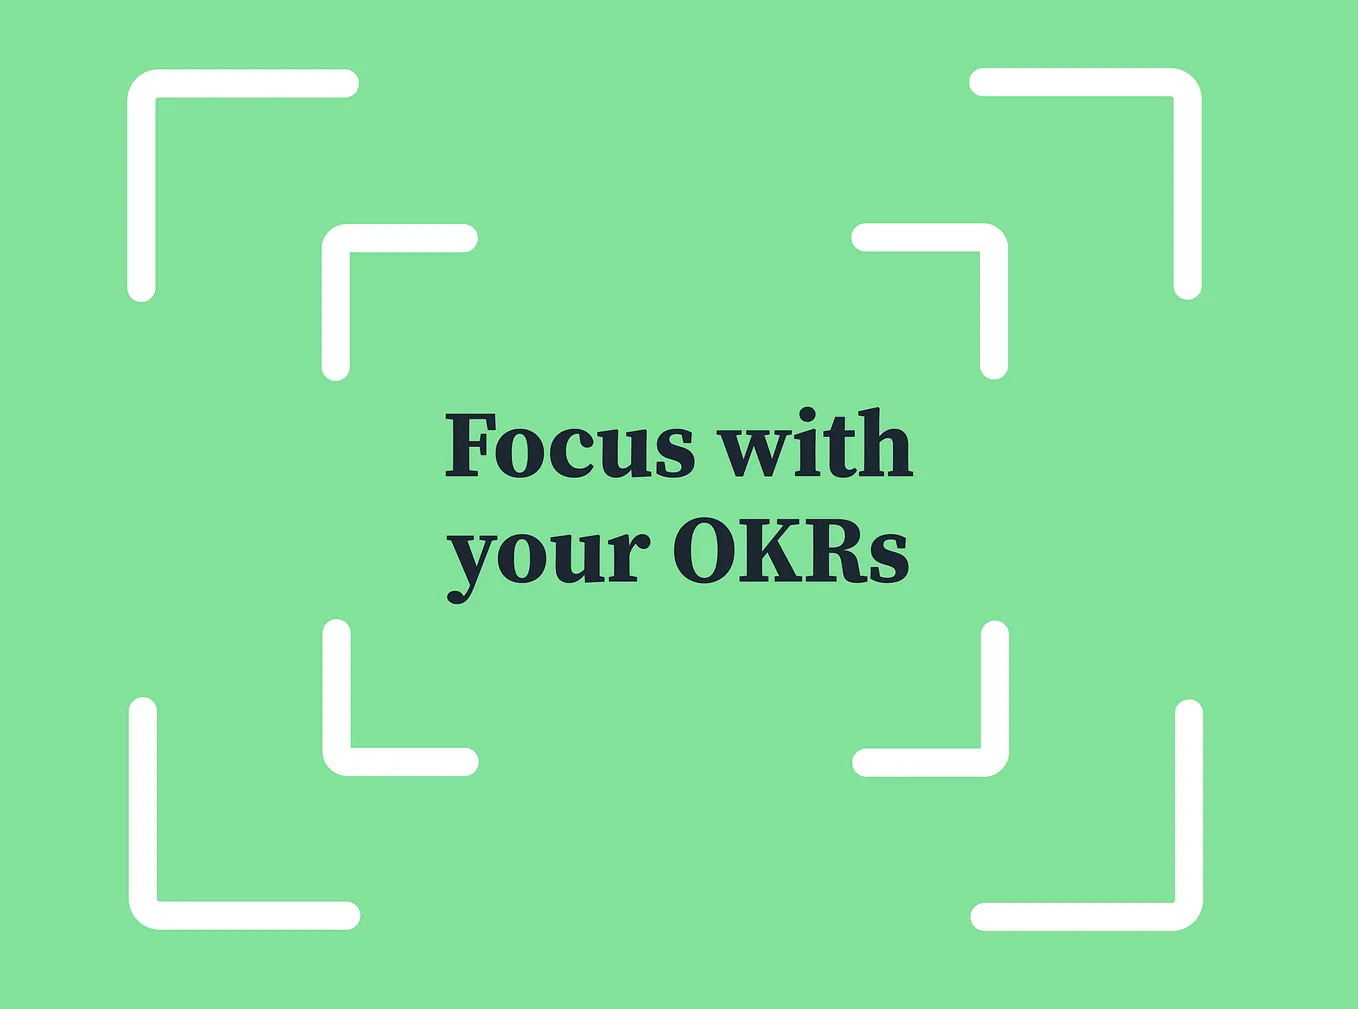 Focus with your OKRs